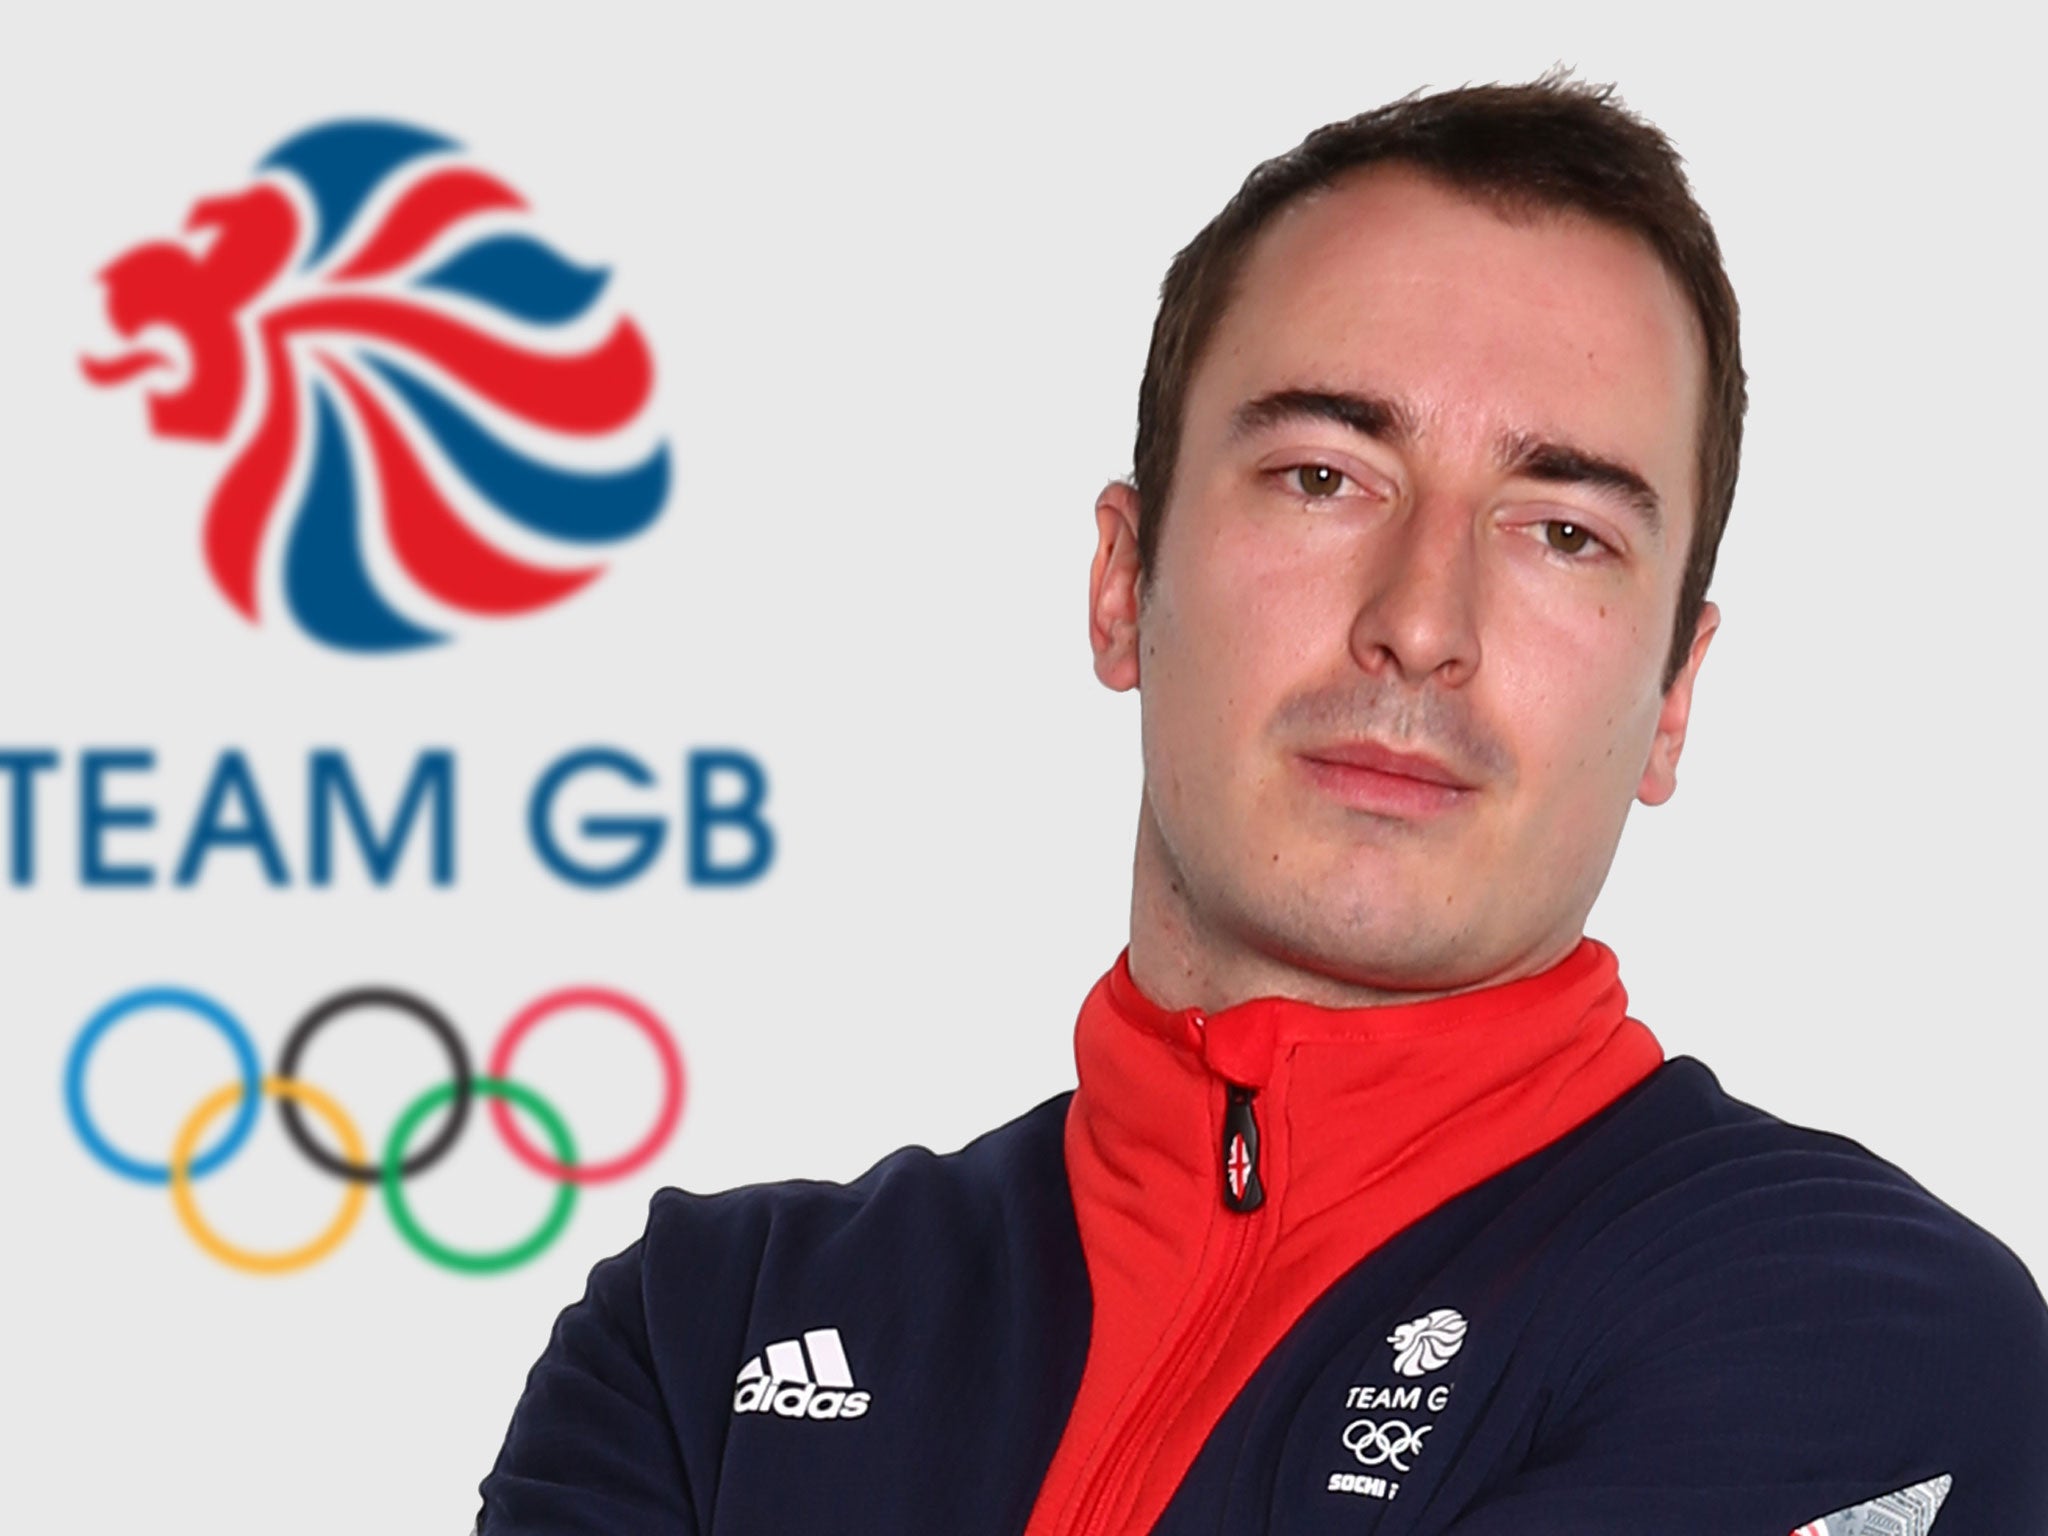 John Baines will replace Craig Pickering in the two-man bobsleigh after he was ruled out through a back injury